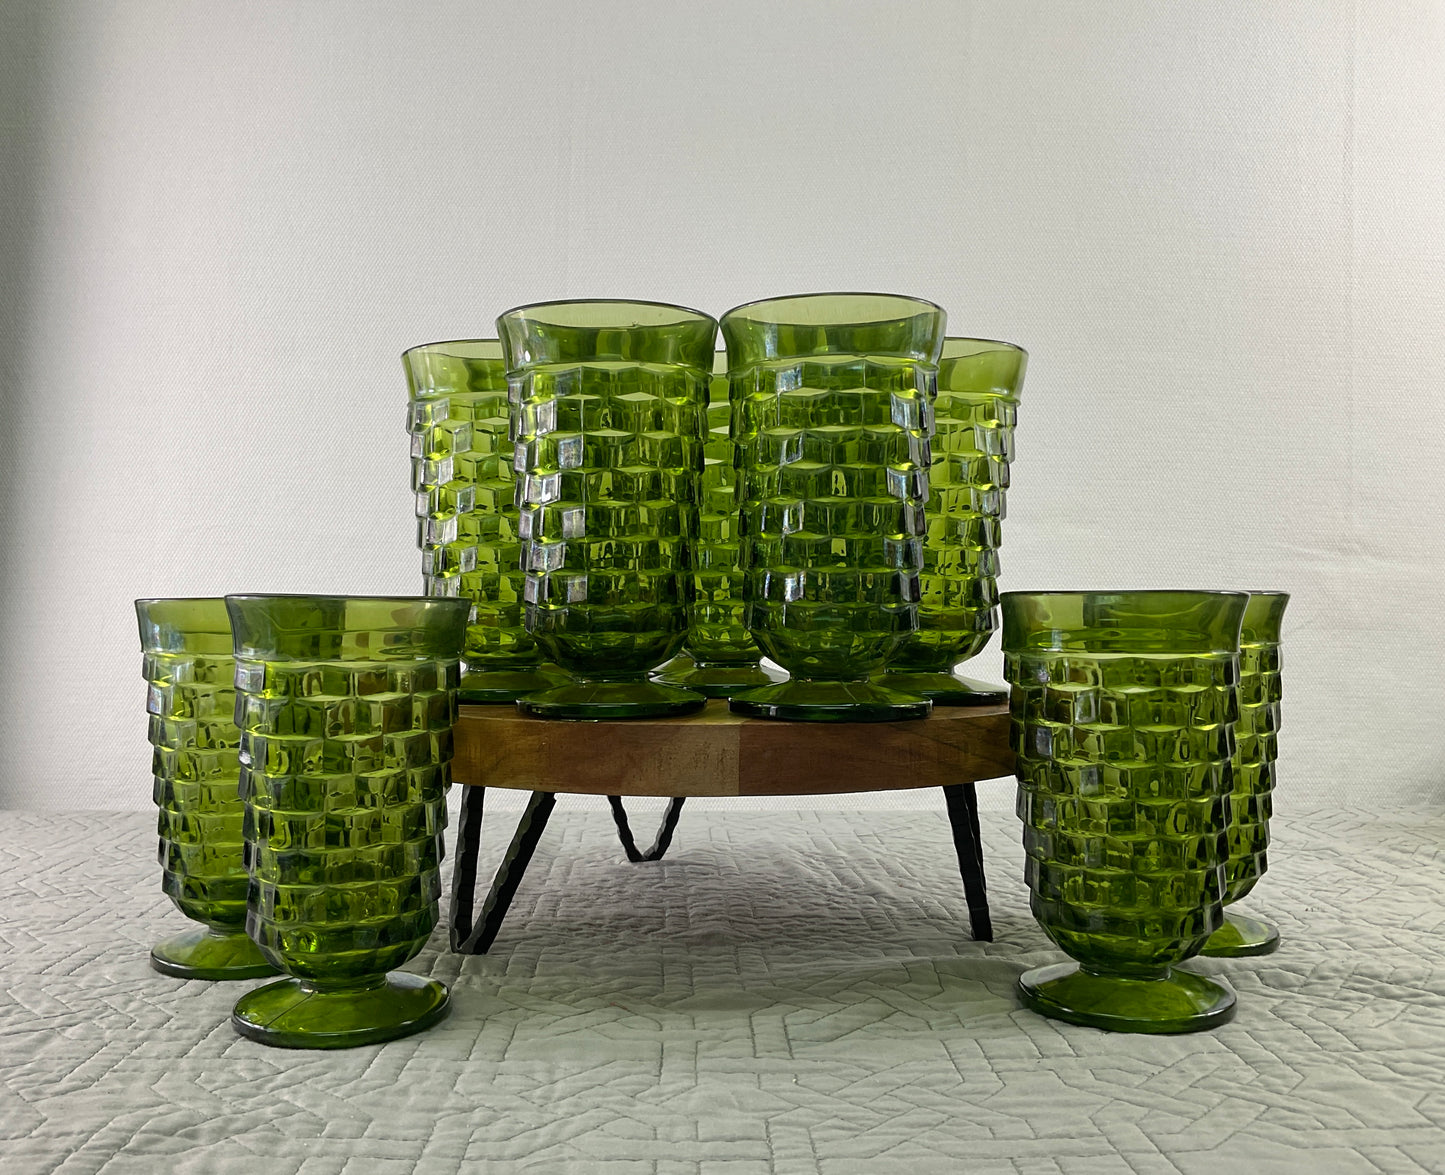 Vintage Avocado Green Footed Glass, Sold Separately